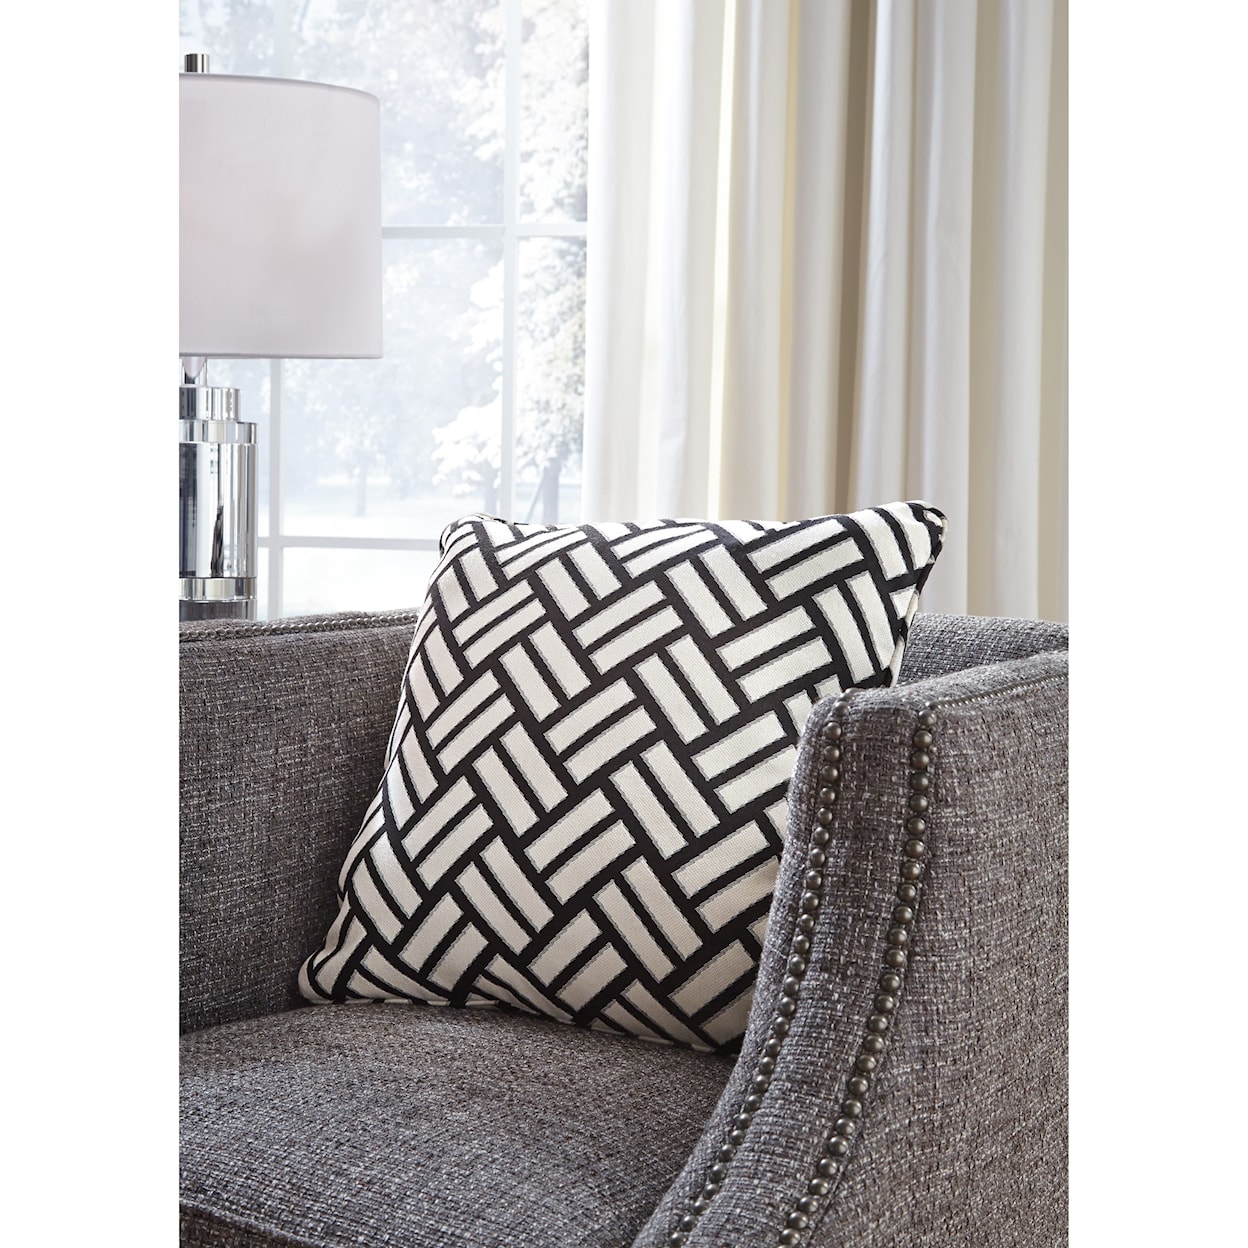 Signature Design by Ashley Furniture Pillows Ayres Black/White Pillow